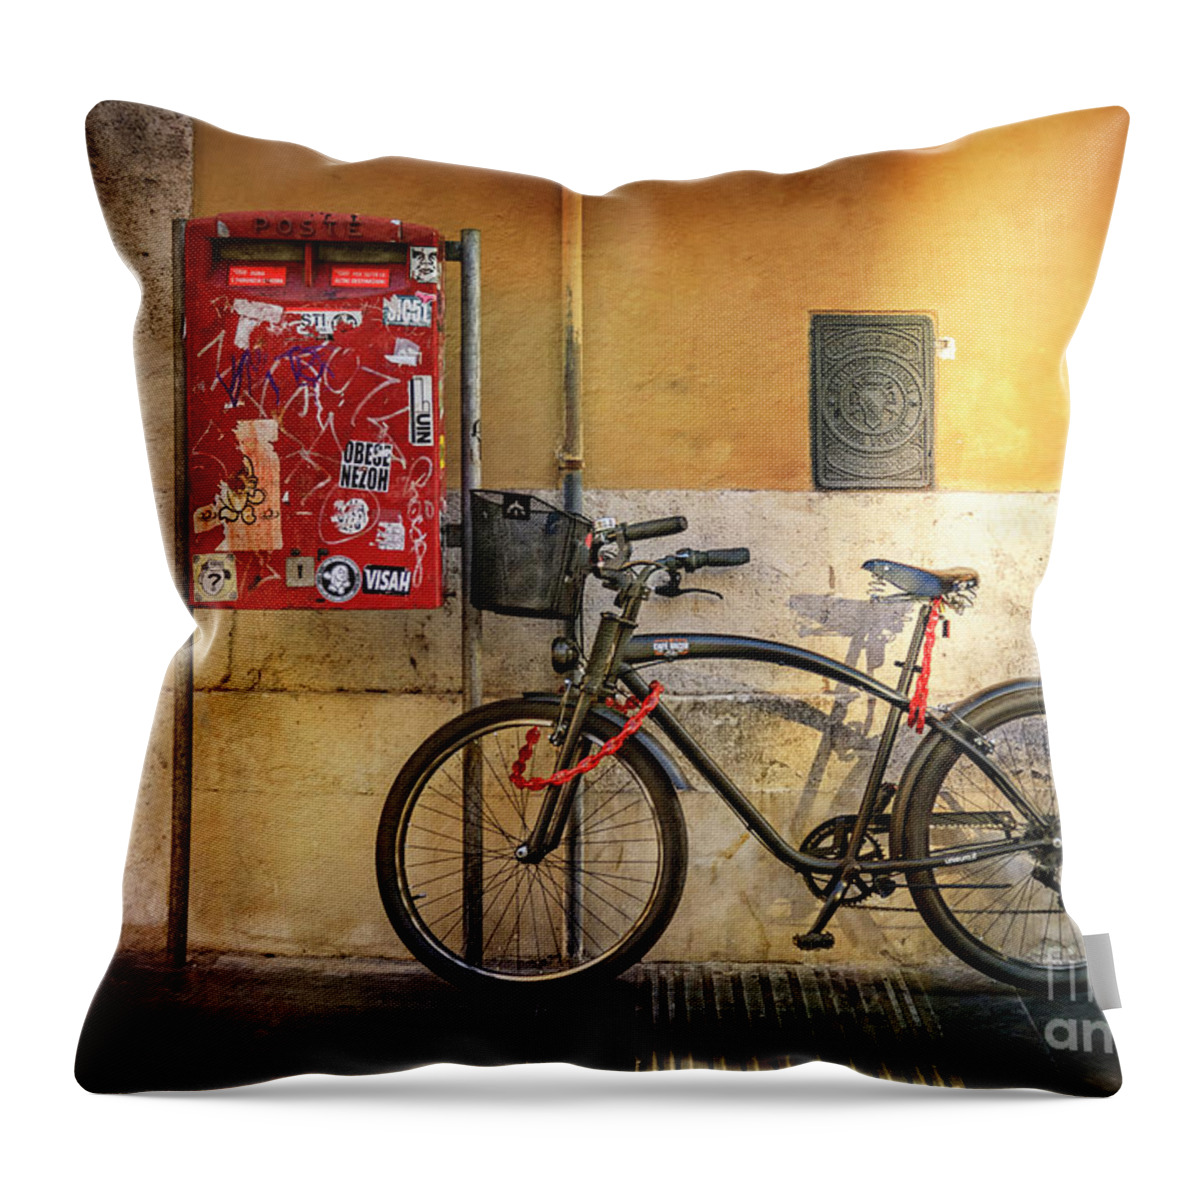 Bicycle Throw Pillow featuring the photograph Cafe Racer Bicycle by Craig J Satterlee